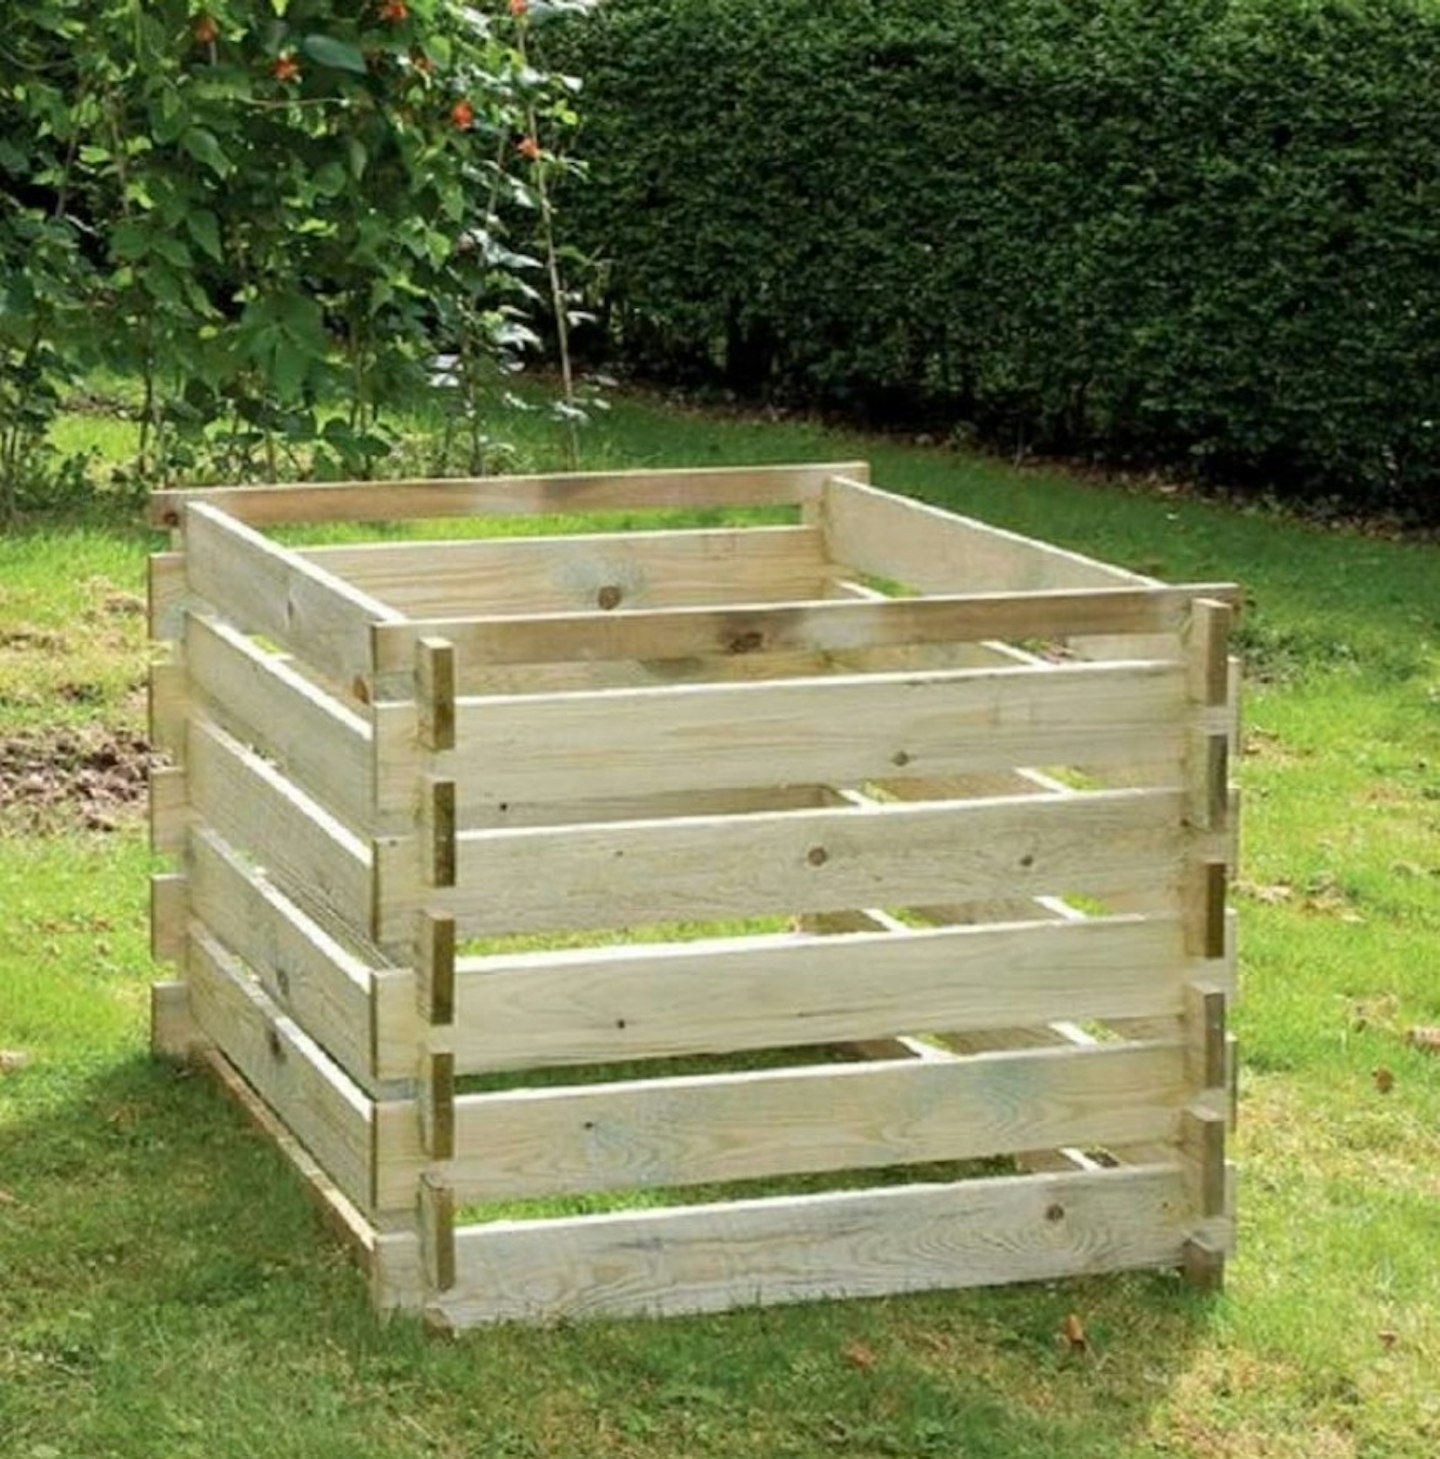  Lacewing Outdoor Wooden Compost Bin